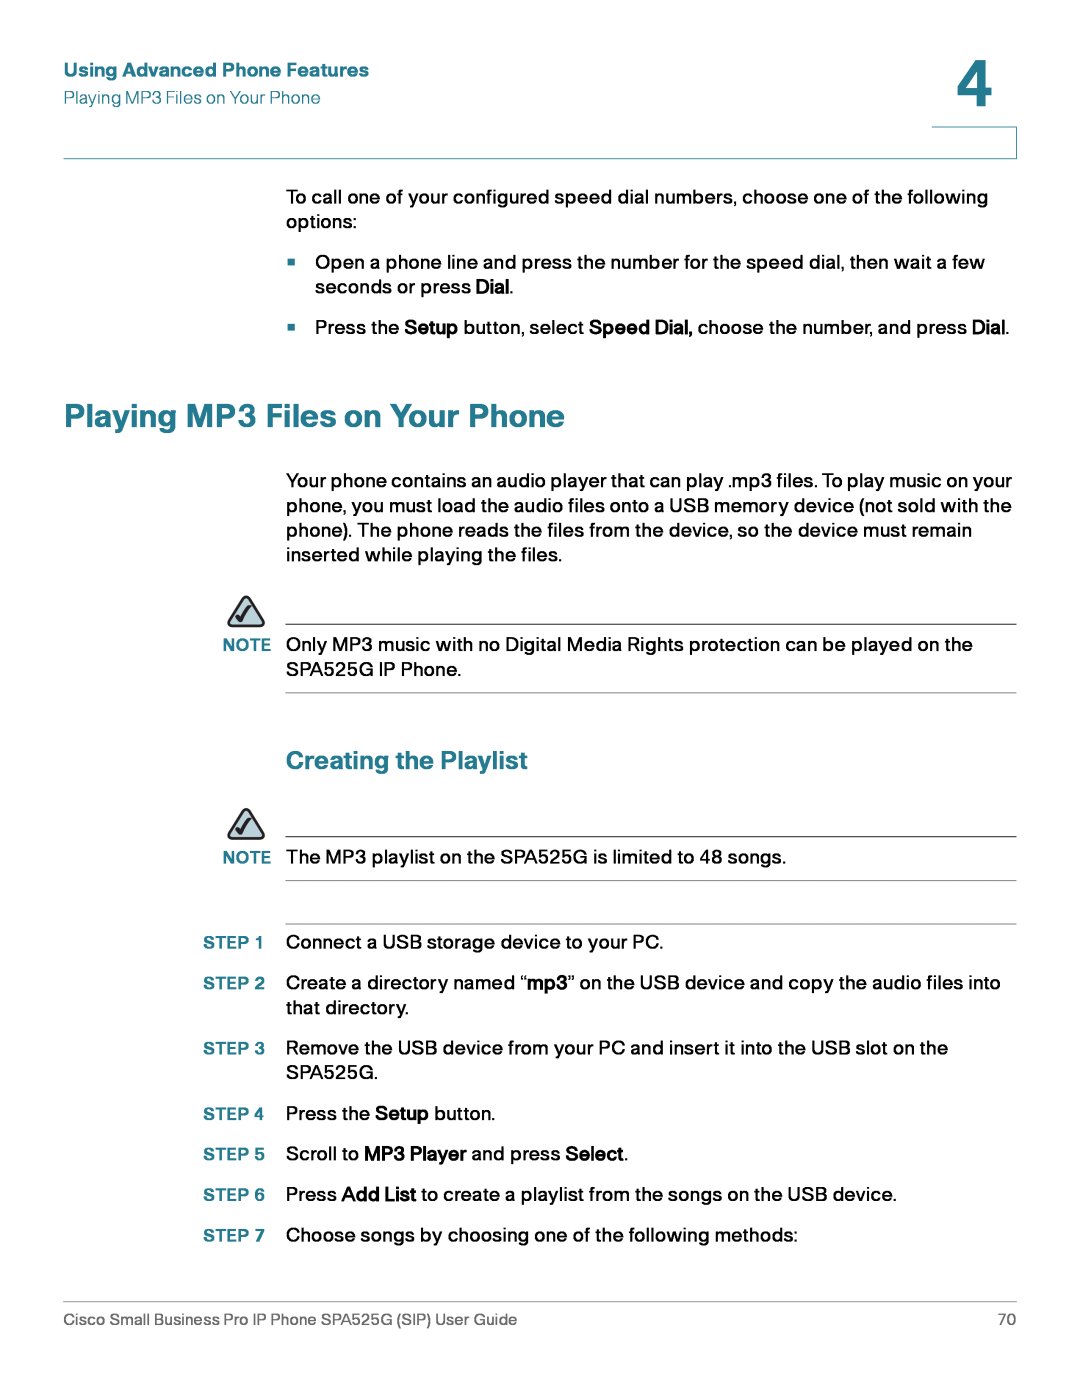 Cisco Systems SPA525G manual Playing MP3 Files on Your Phone, Creating the Playlist, Using Advanced Phone Features 